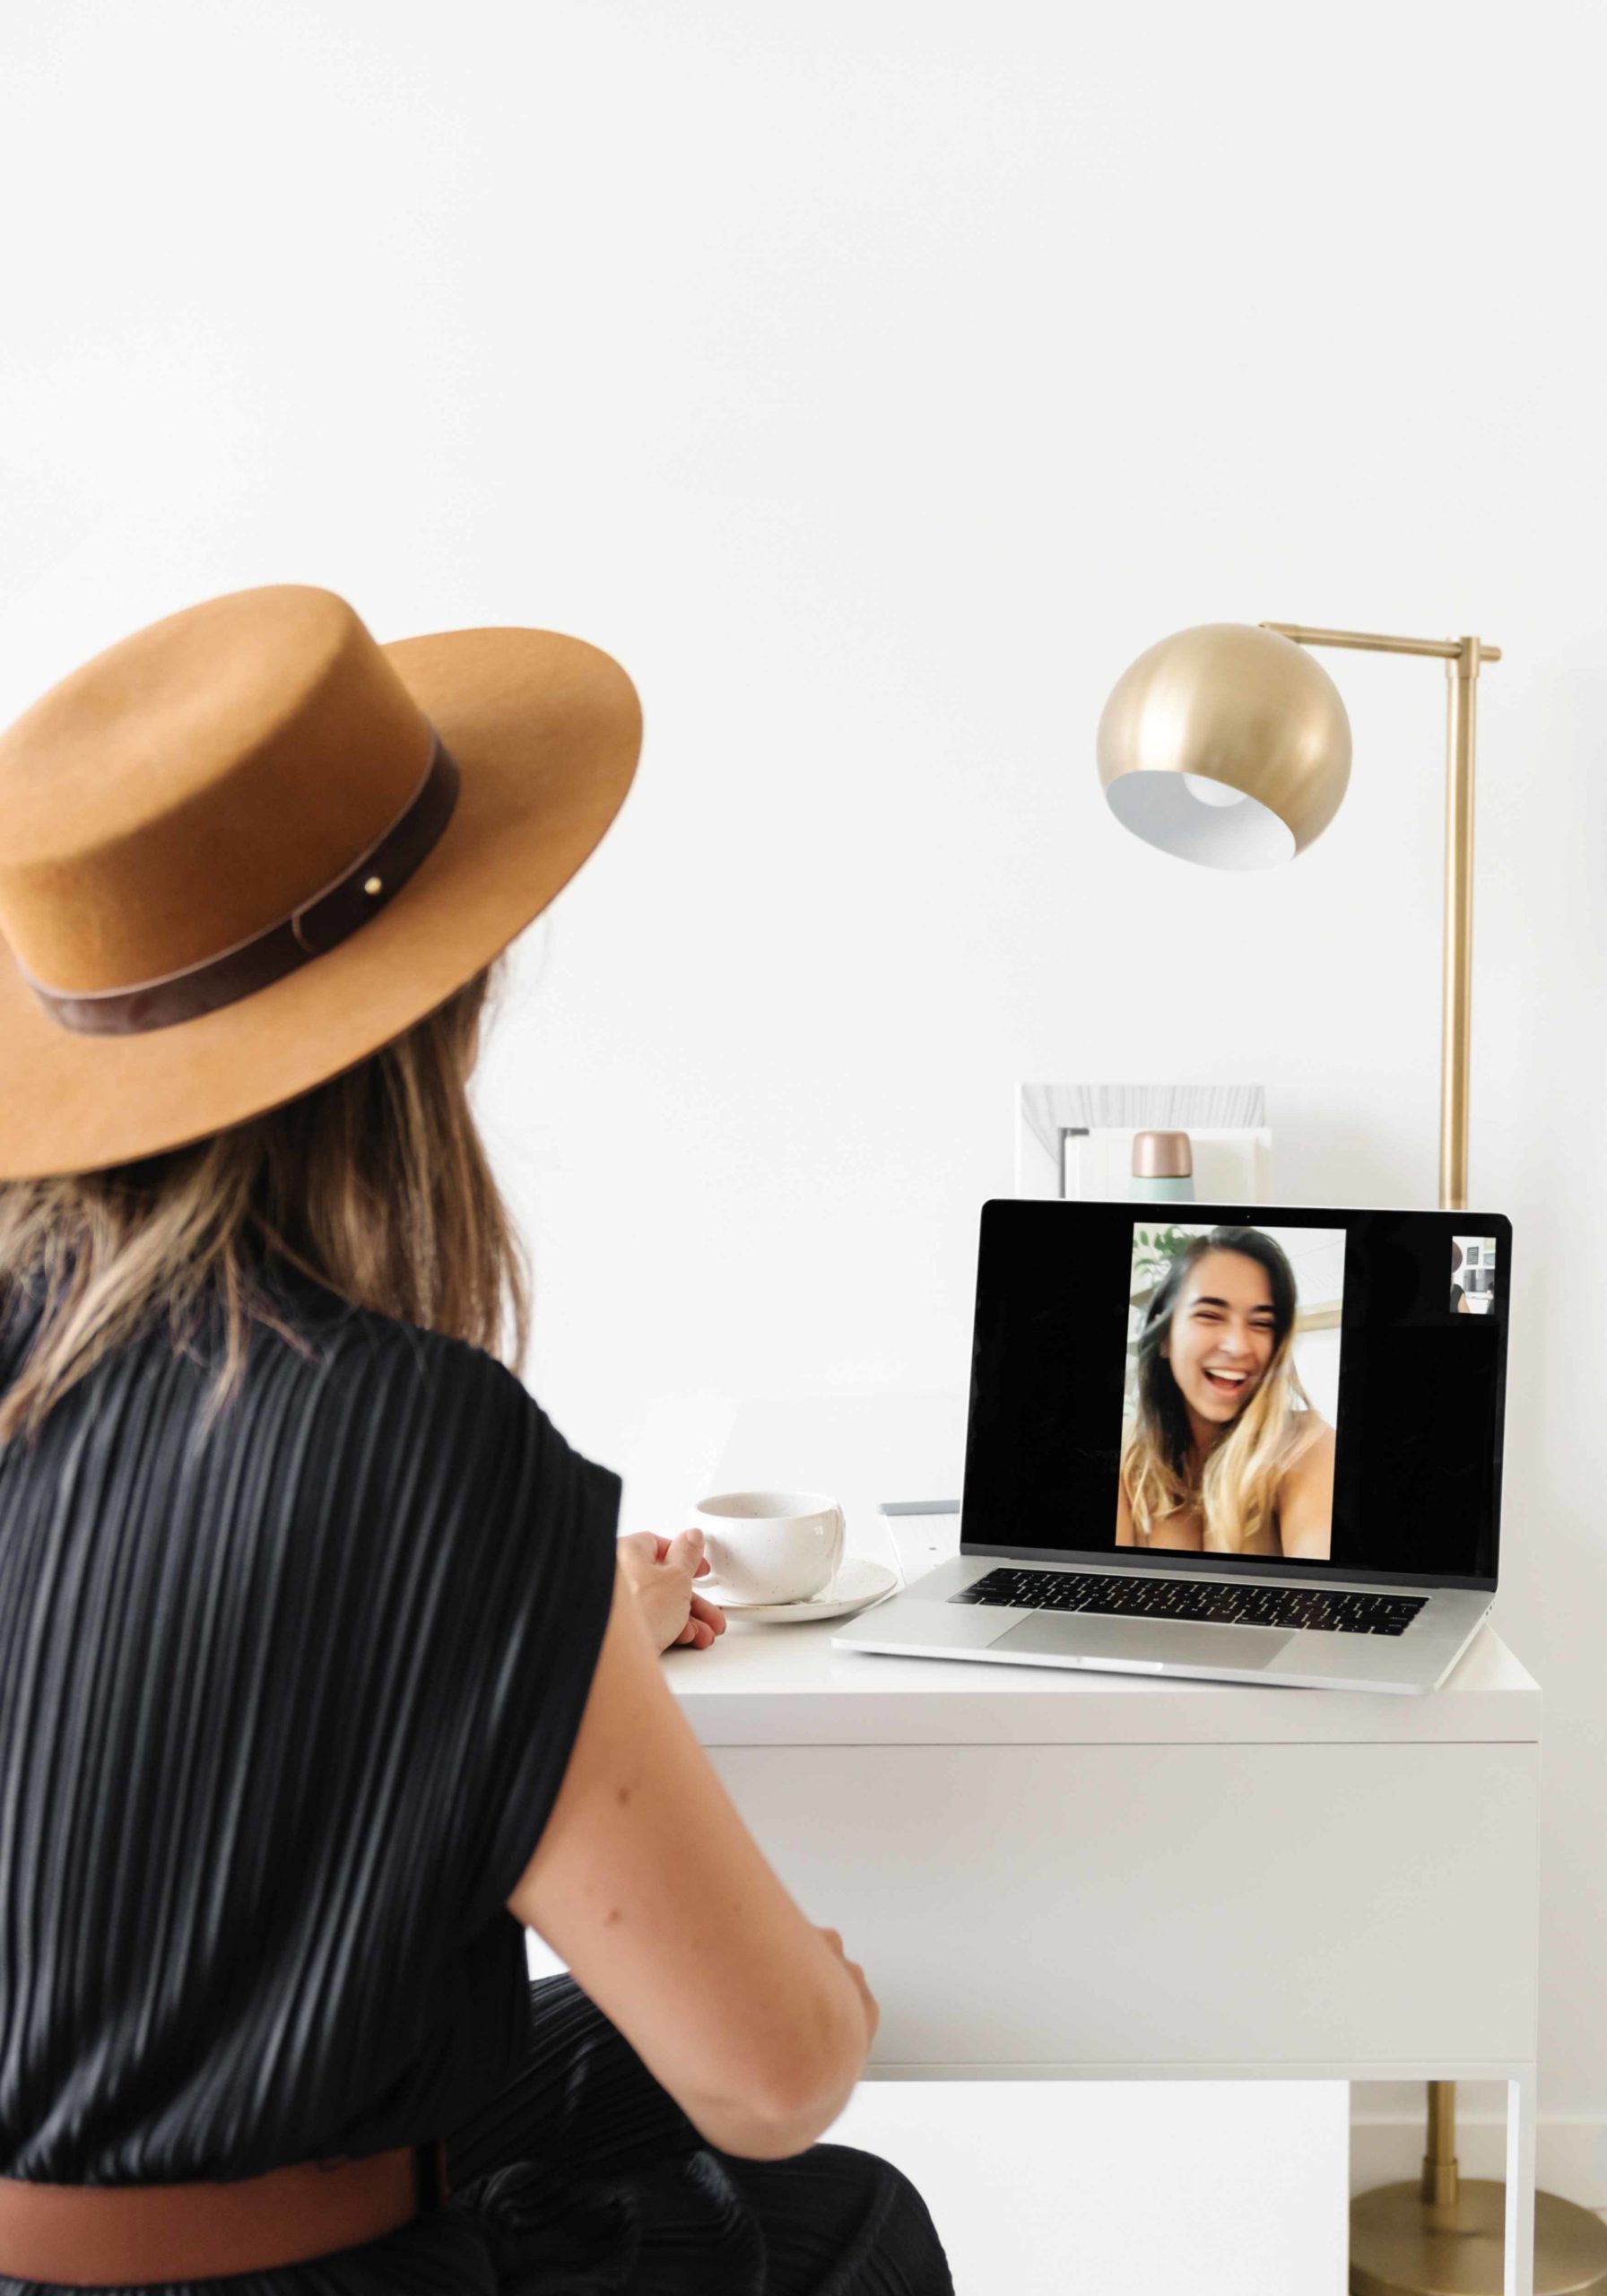 Two Woman Speaking to each other on a zoom call, woman is thinking about improving her client experience